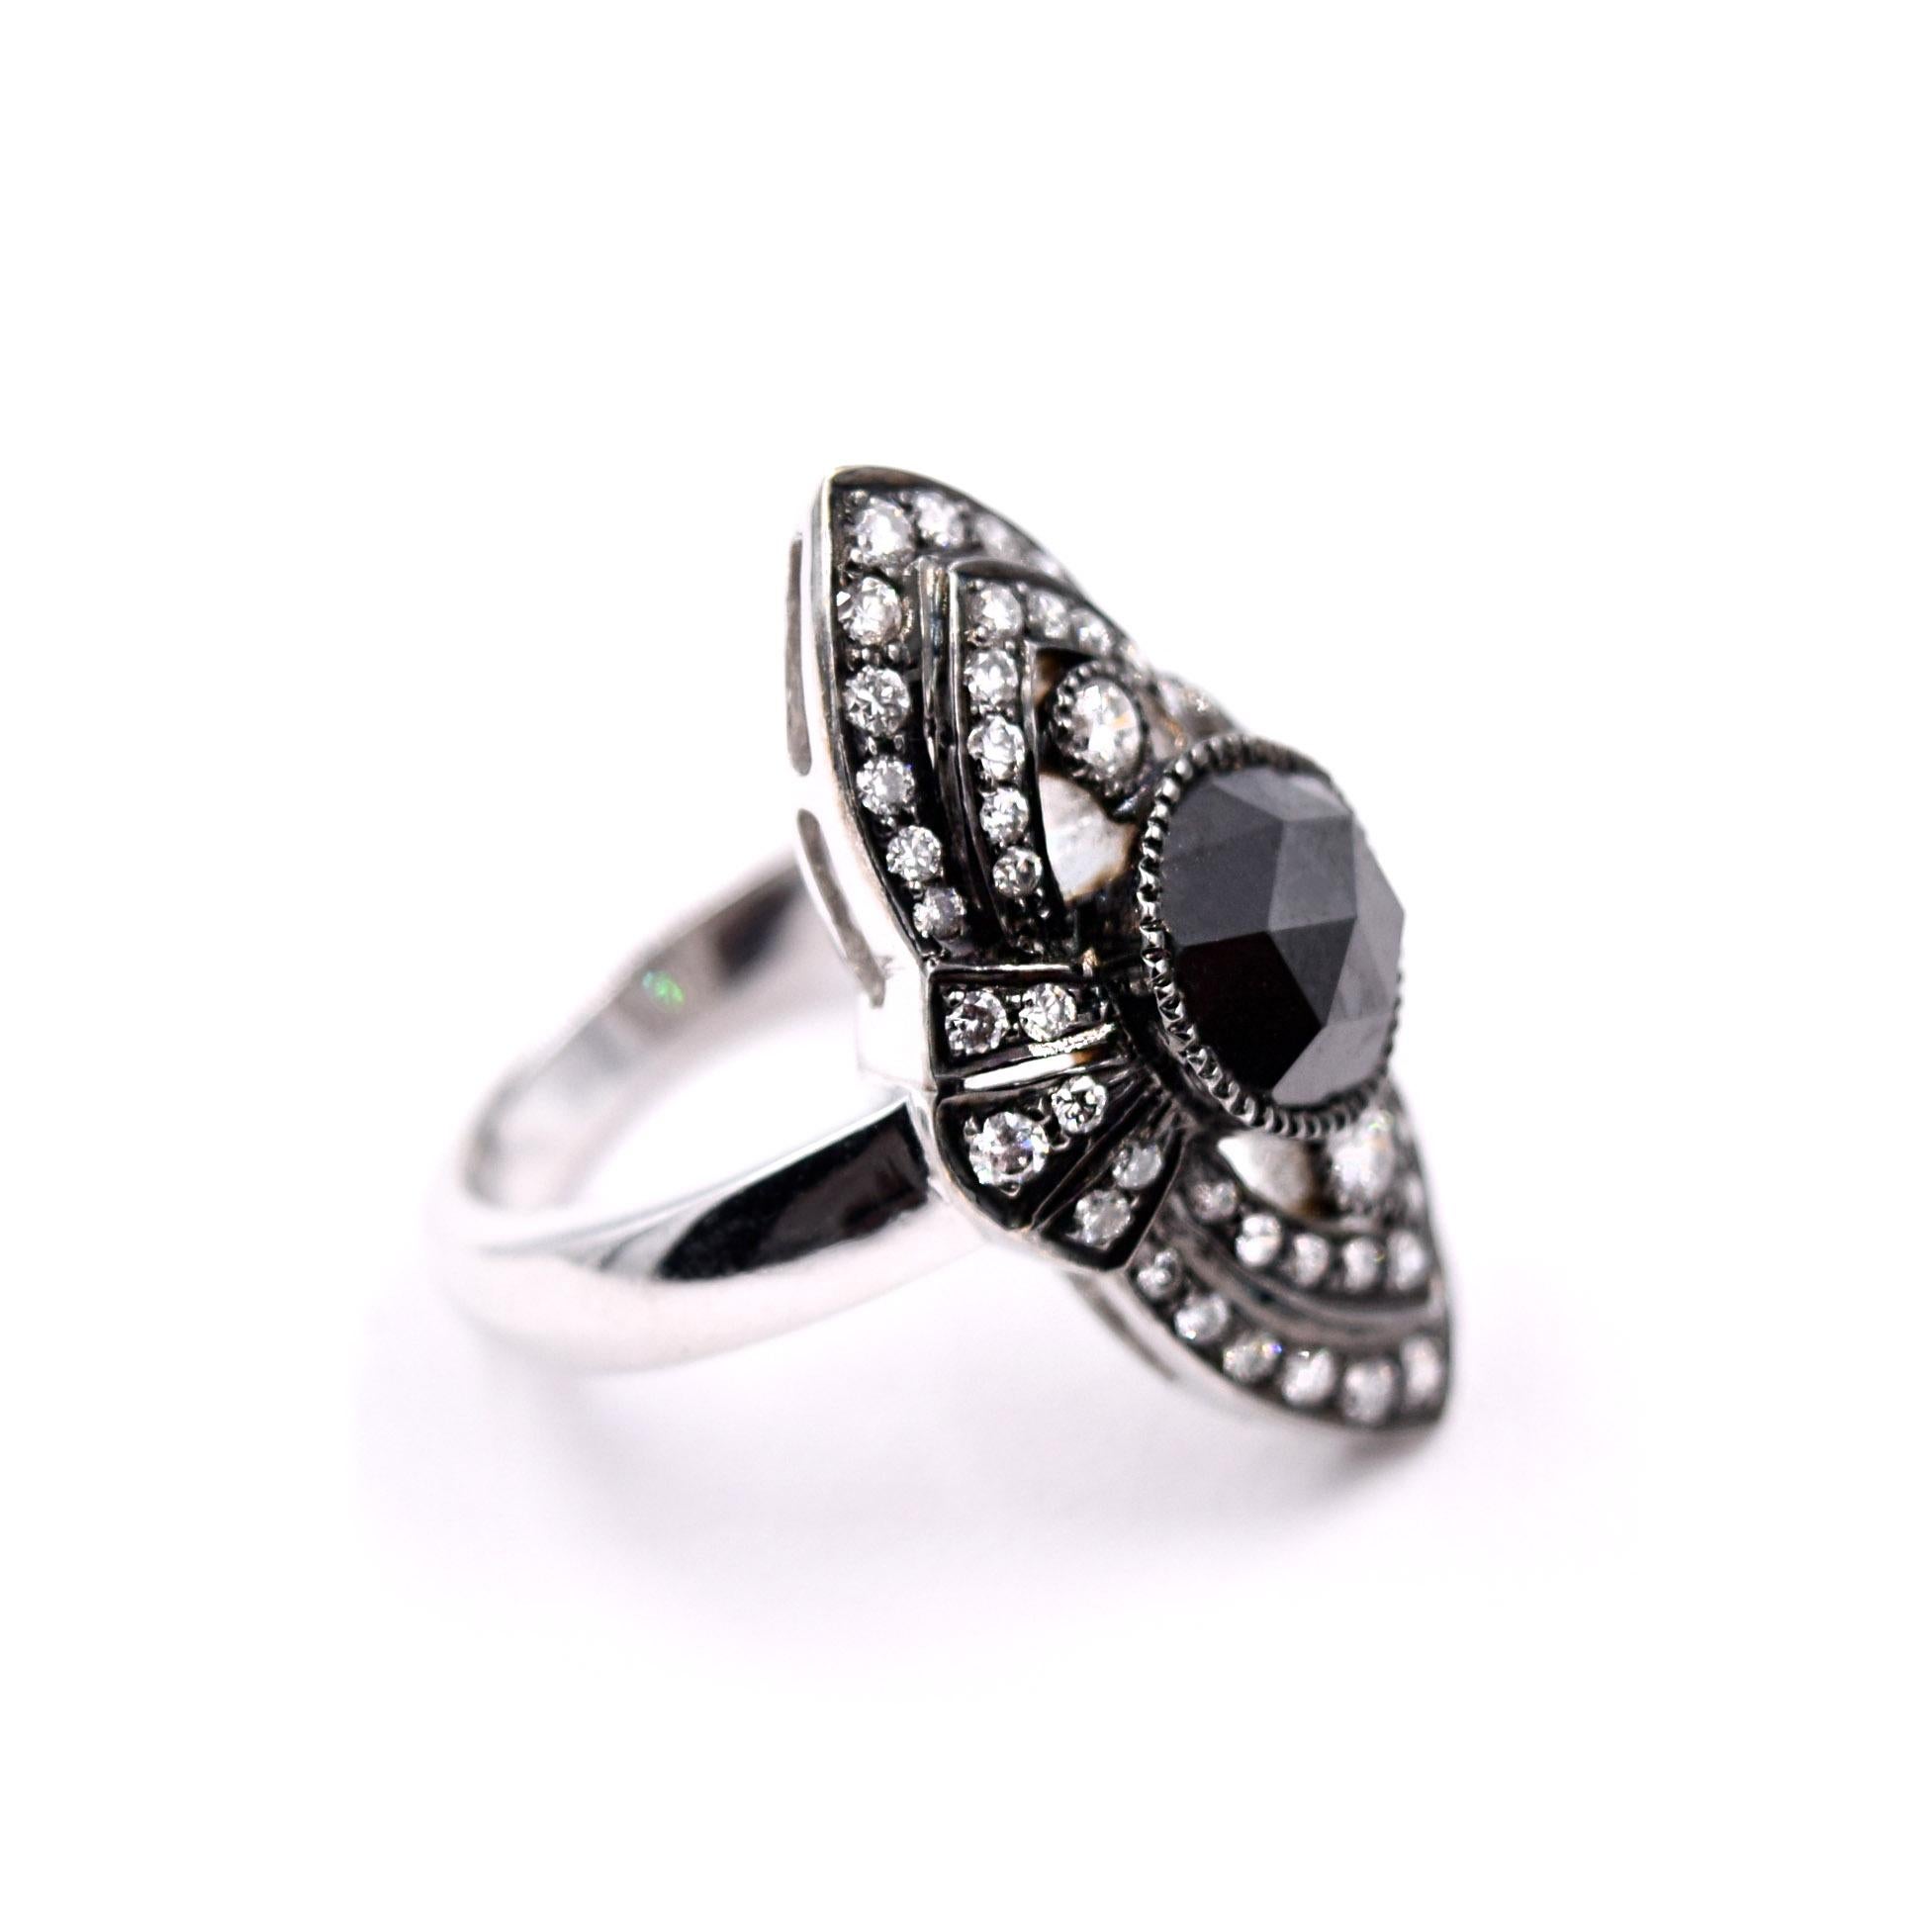 3.32ct black diamond and white diamond cocktail ring by Sethi Couture in 18K white gold and rhodium.
Ring is size 7 and can be sized.